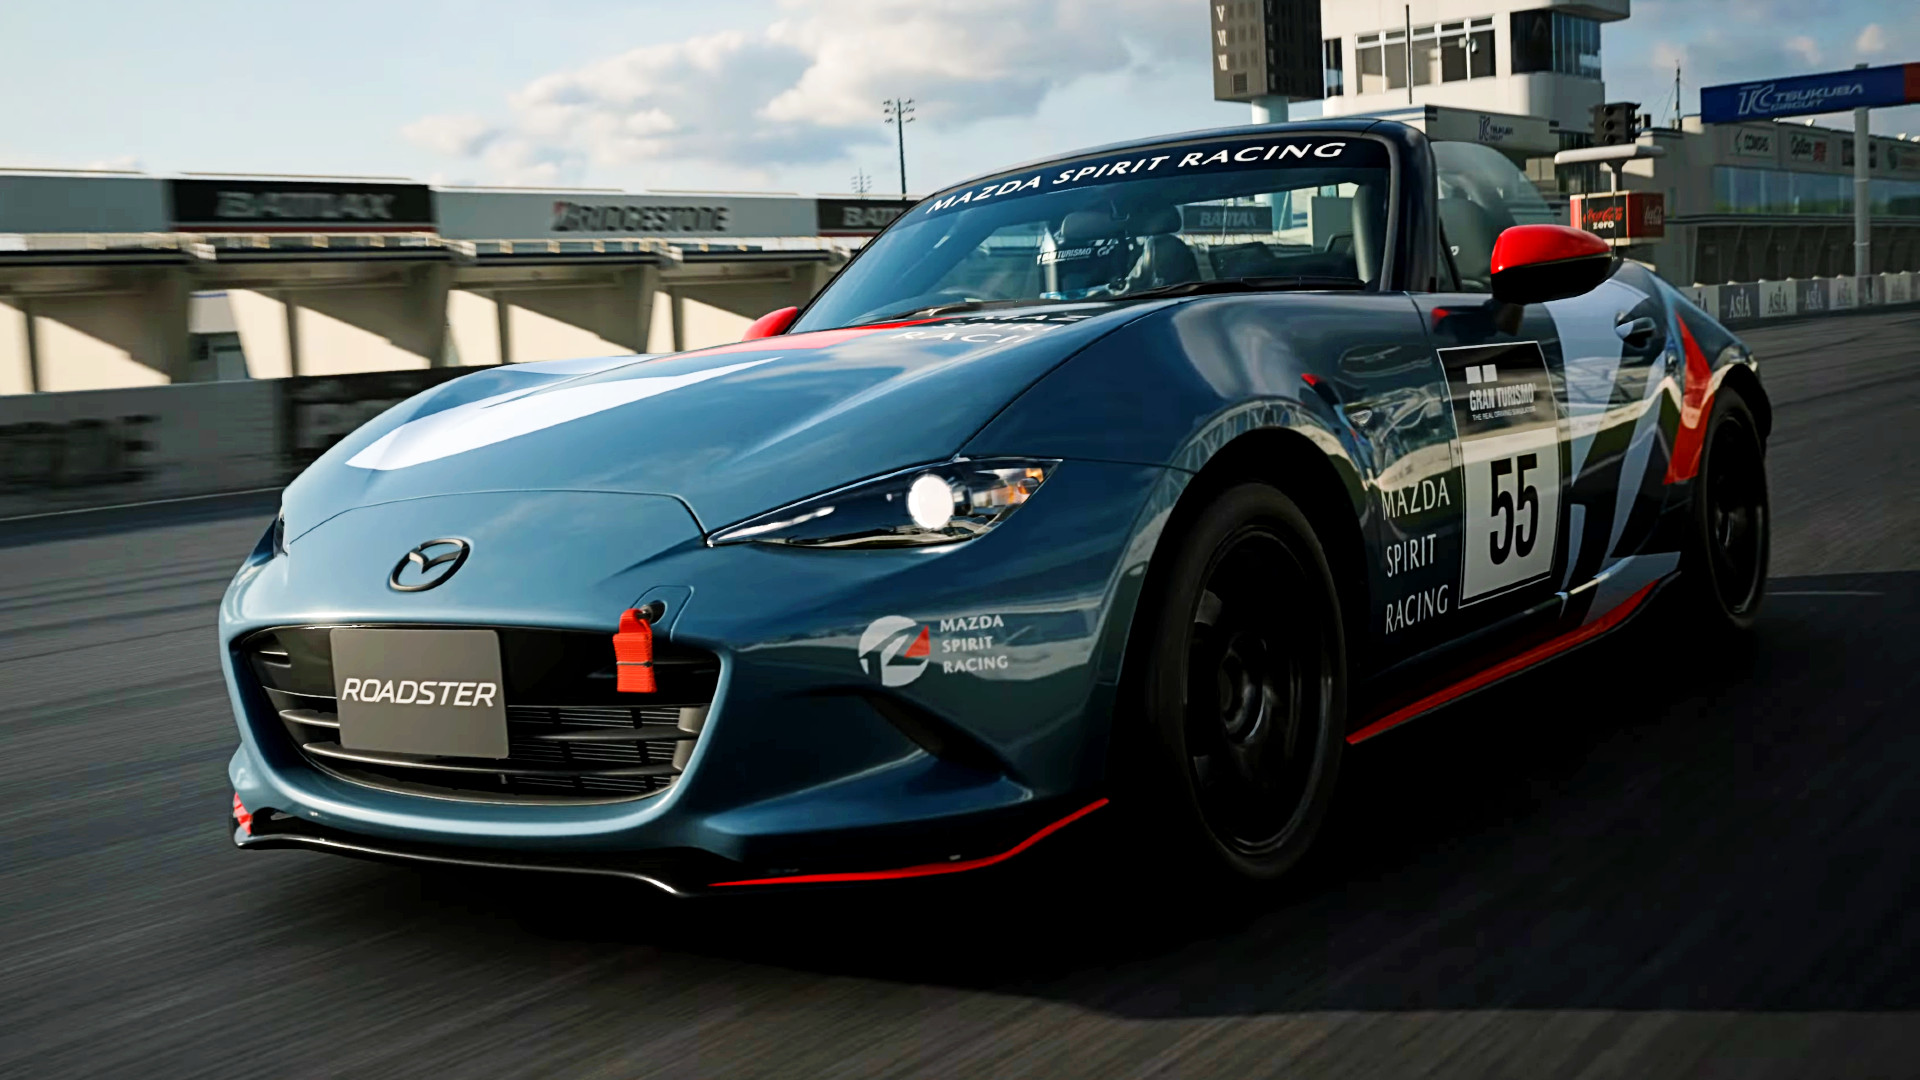 Gran Turismo PC could follow God of War, Uncharted, and Spider-Man